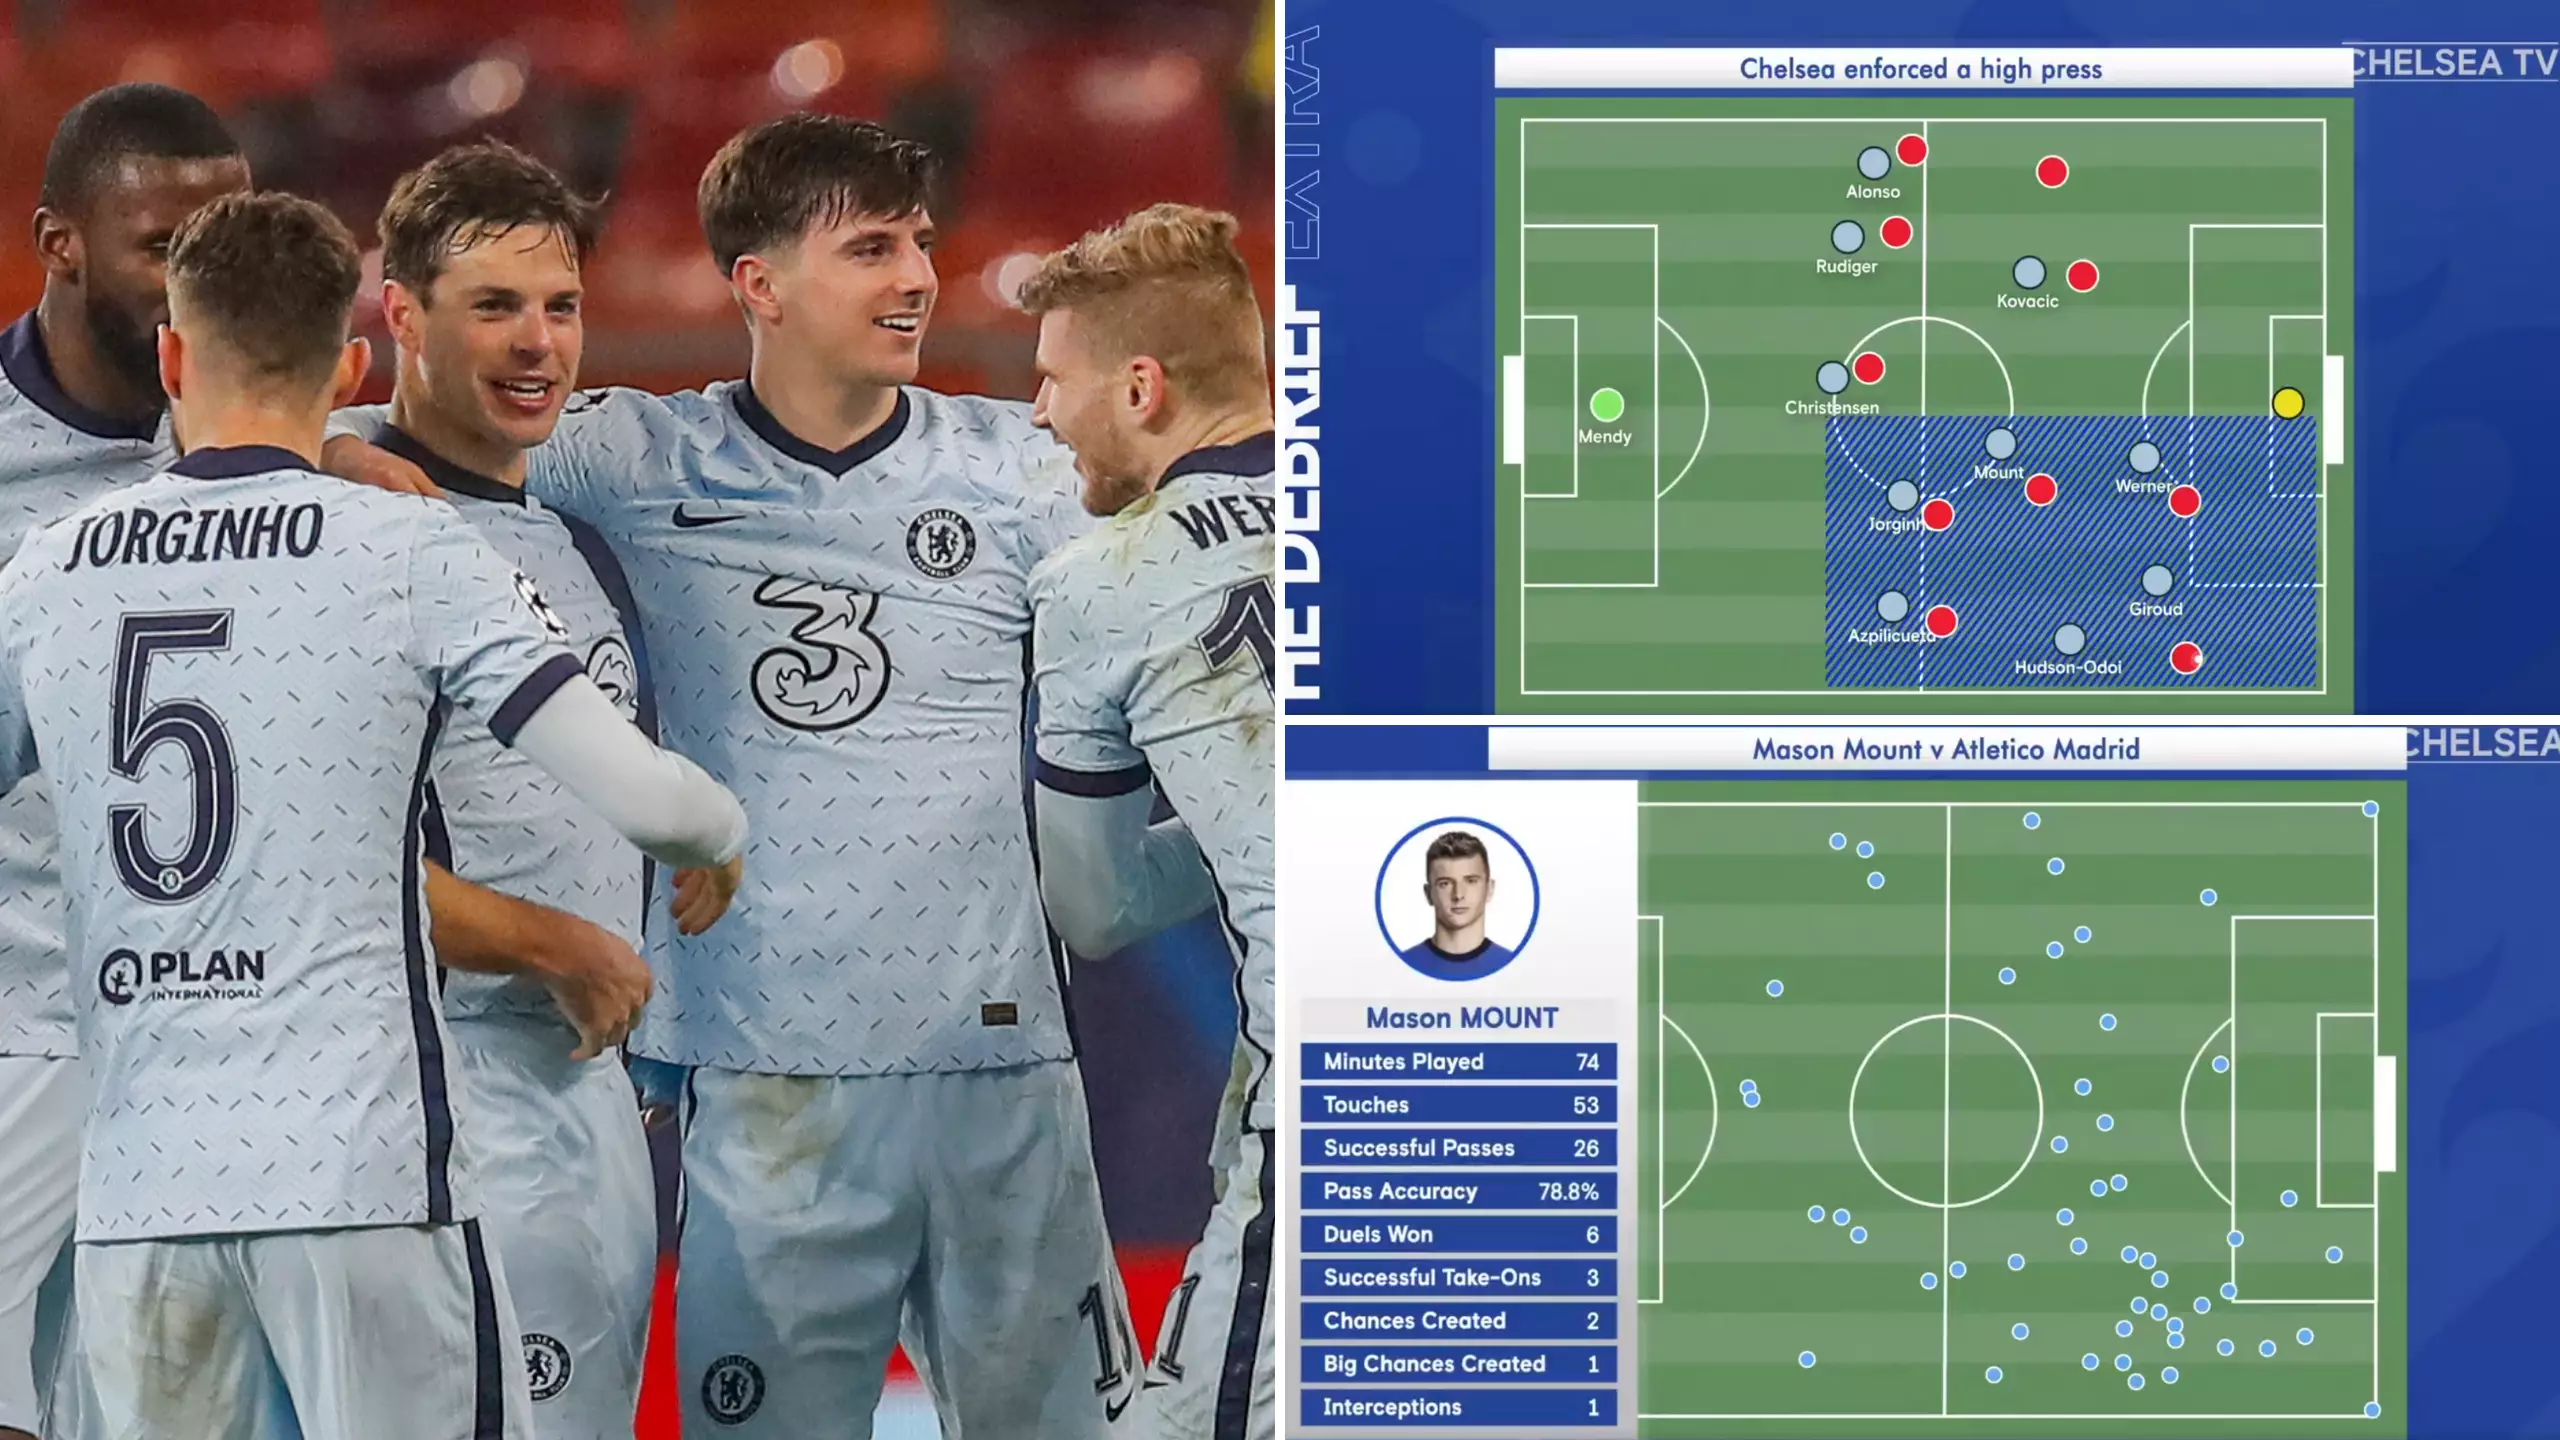 Chelsea's Official Account Gives Breakdown Of Win Vs Atletico, Fans Think It's The Future Of Football Analysis